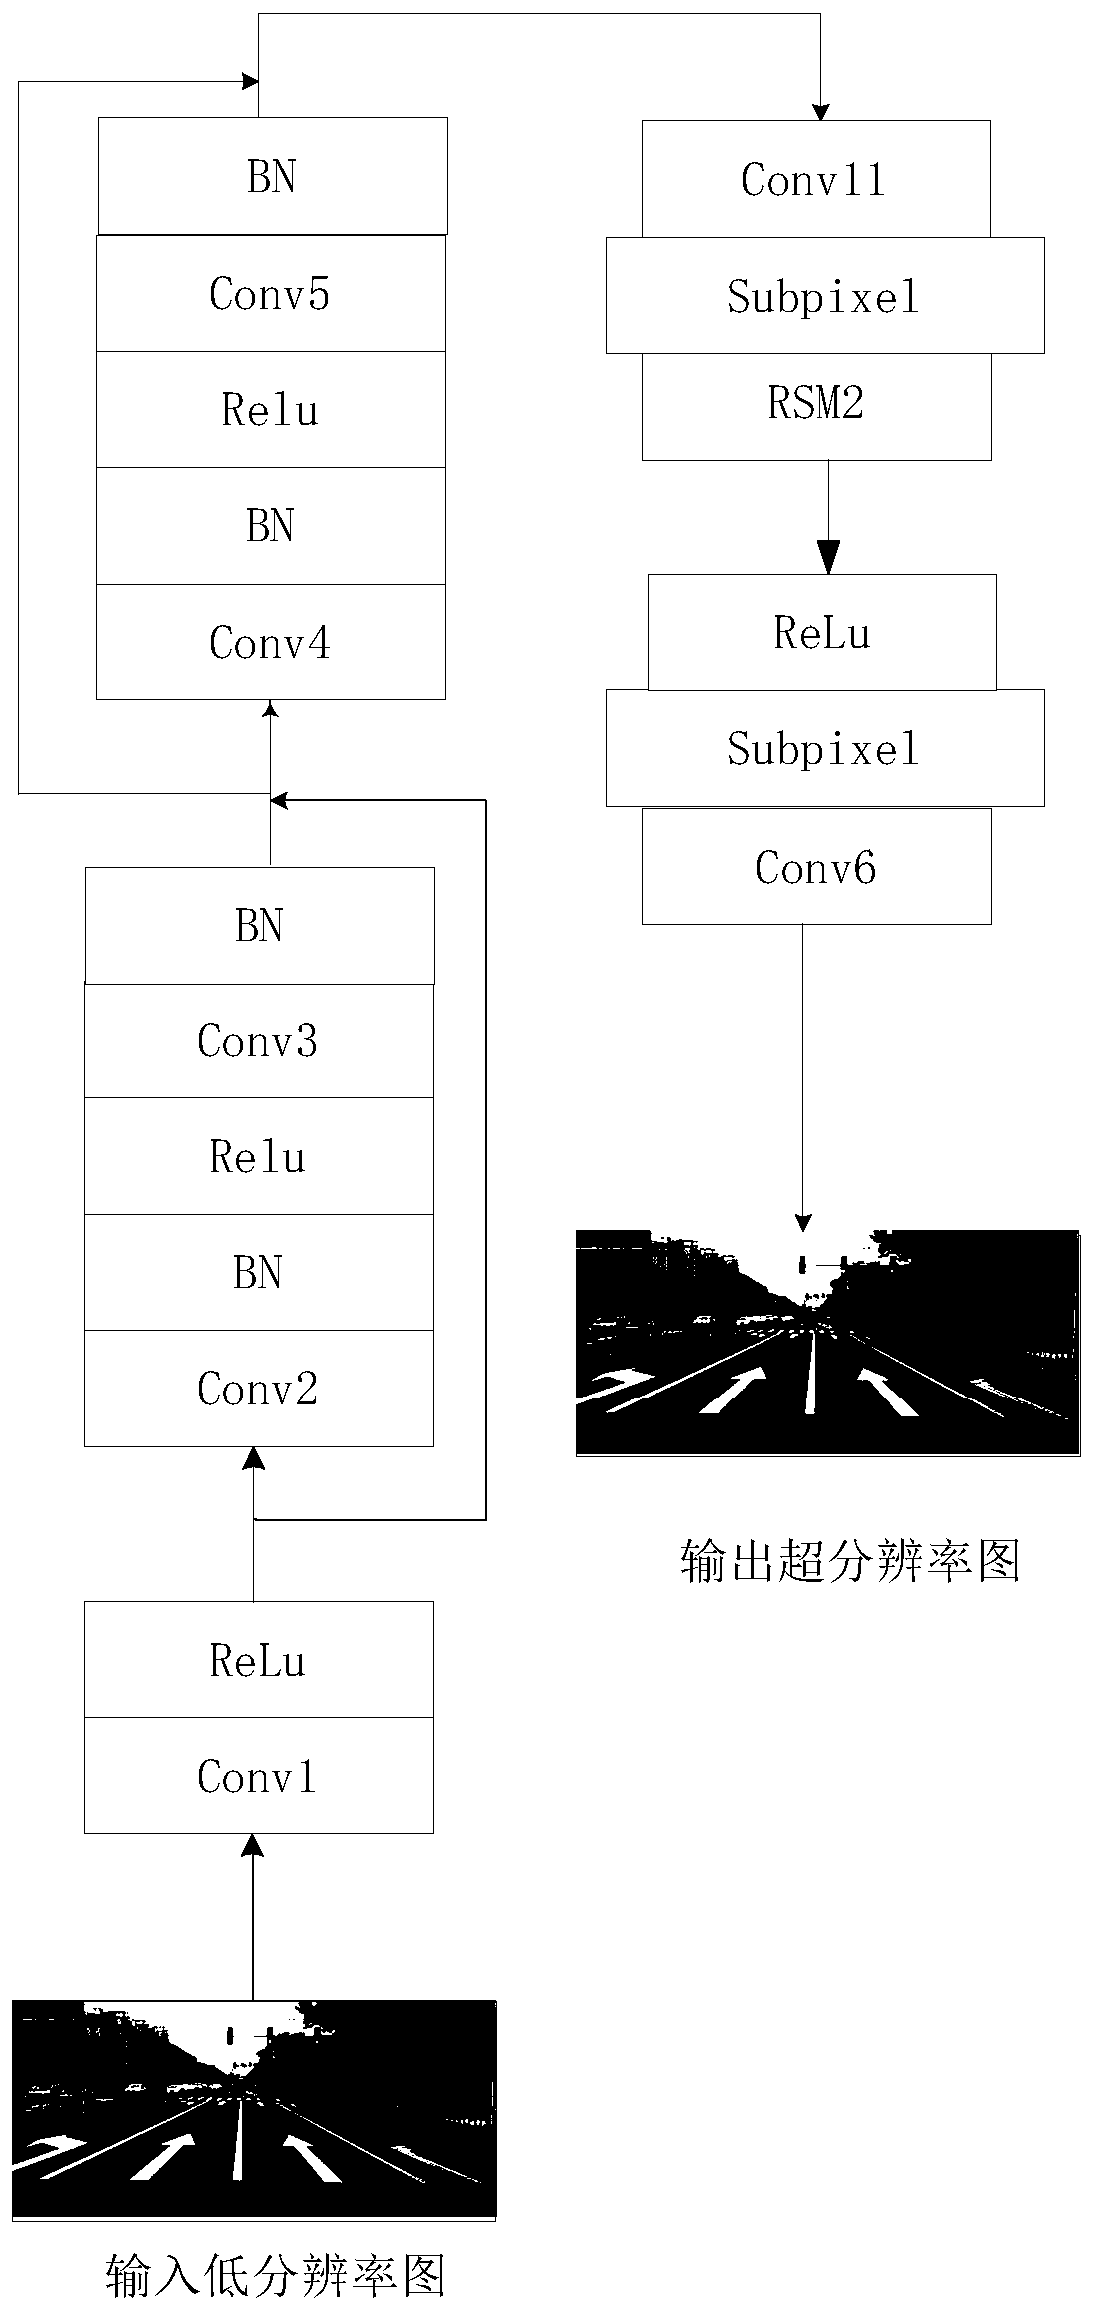 An unmanned lane line detection method based on a generative adversarial network